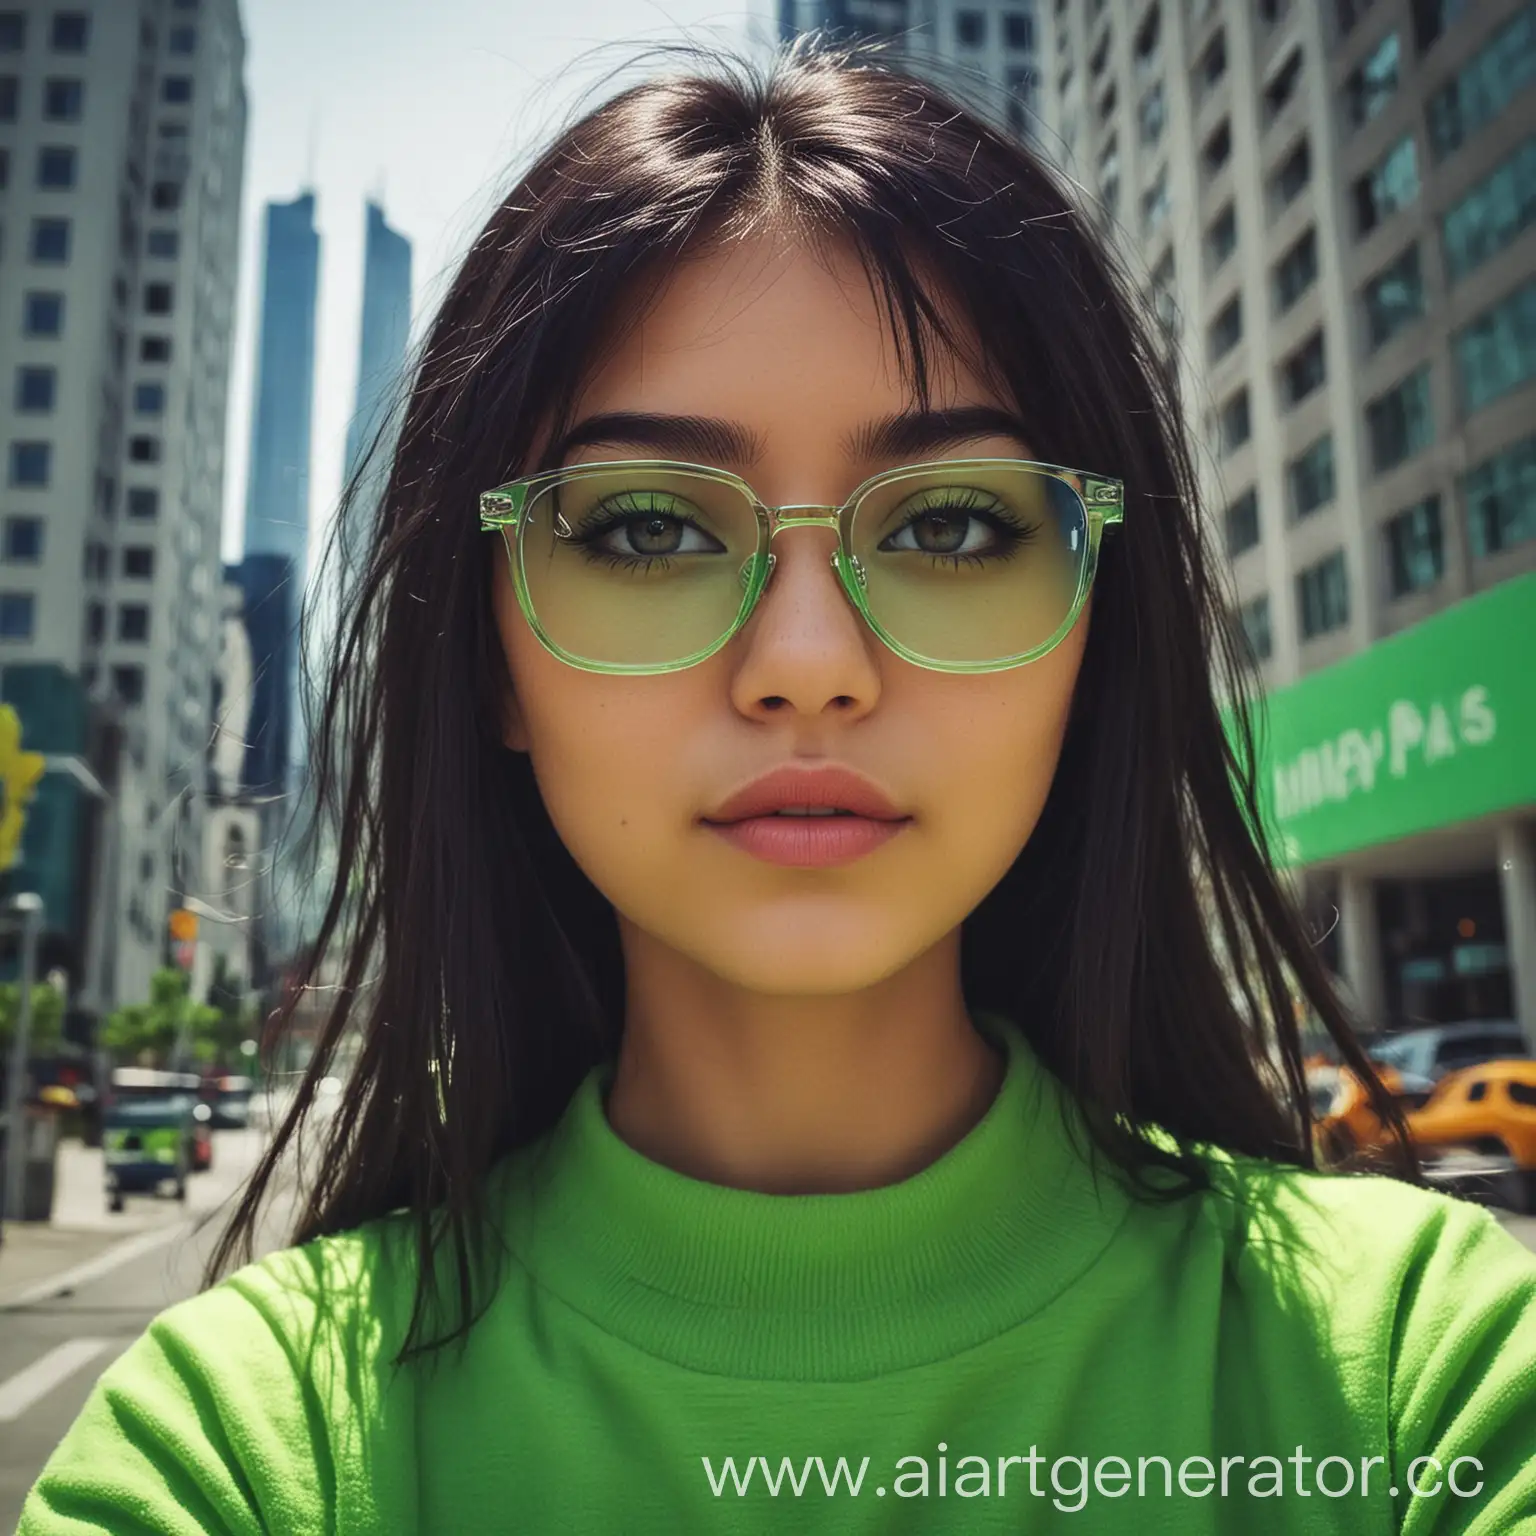 Urban-Girl-with-Dark-Hair-Wearing-Bright-Green-Glasses-in-the-Cityscape